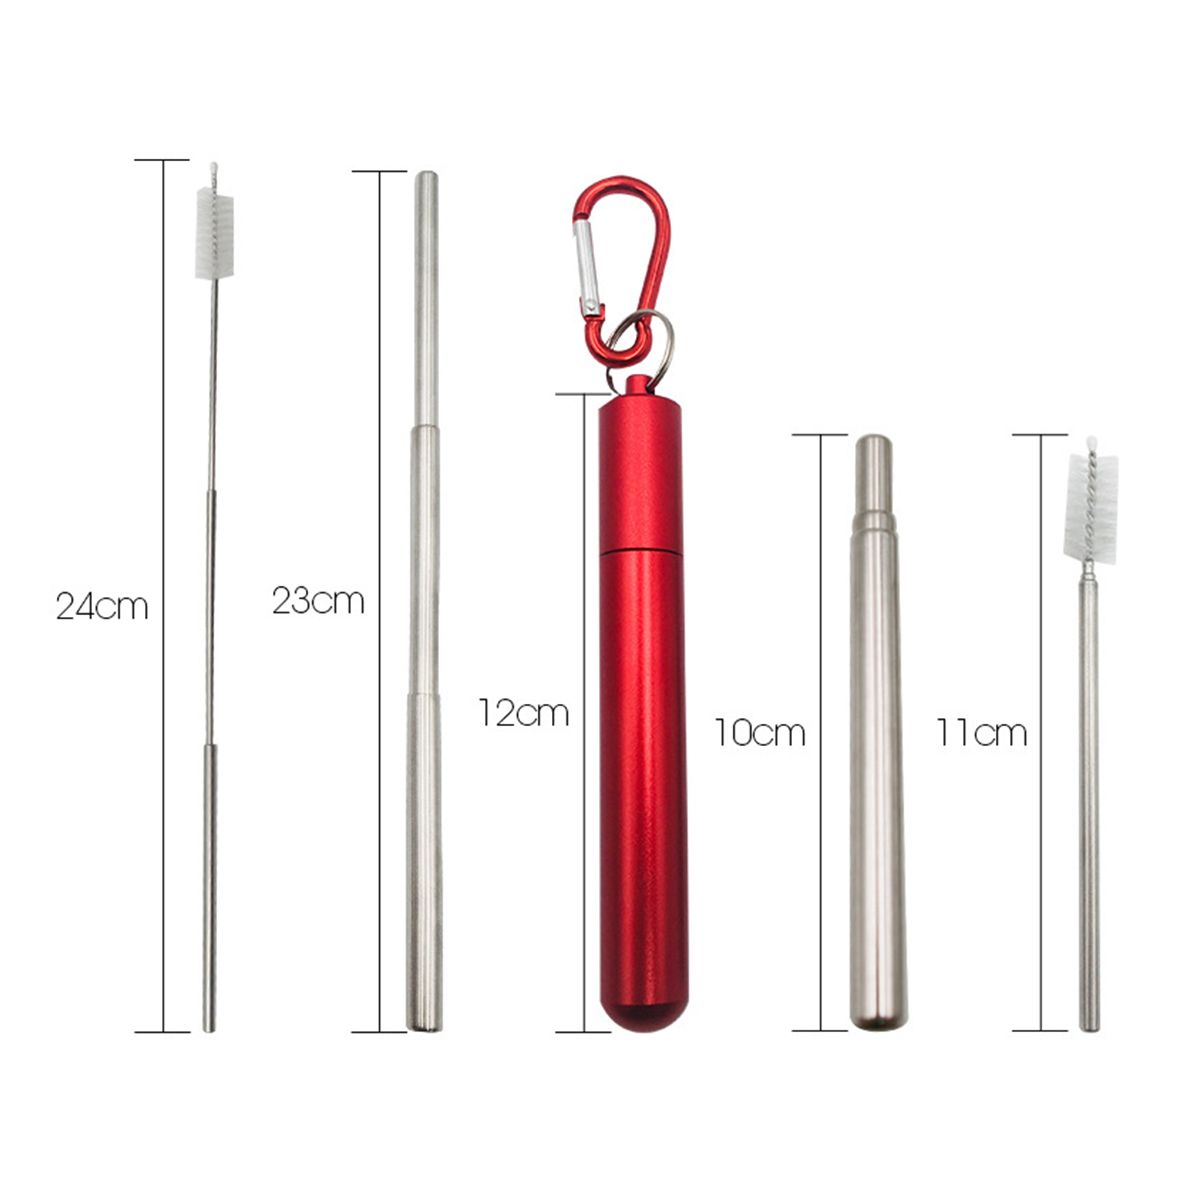 Reusable-Collapsible-Straw-with-Case-amp-Brush-Retractable-Stainless-Steel-Metal-Drinking-Straws-1626029